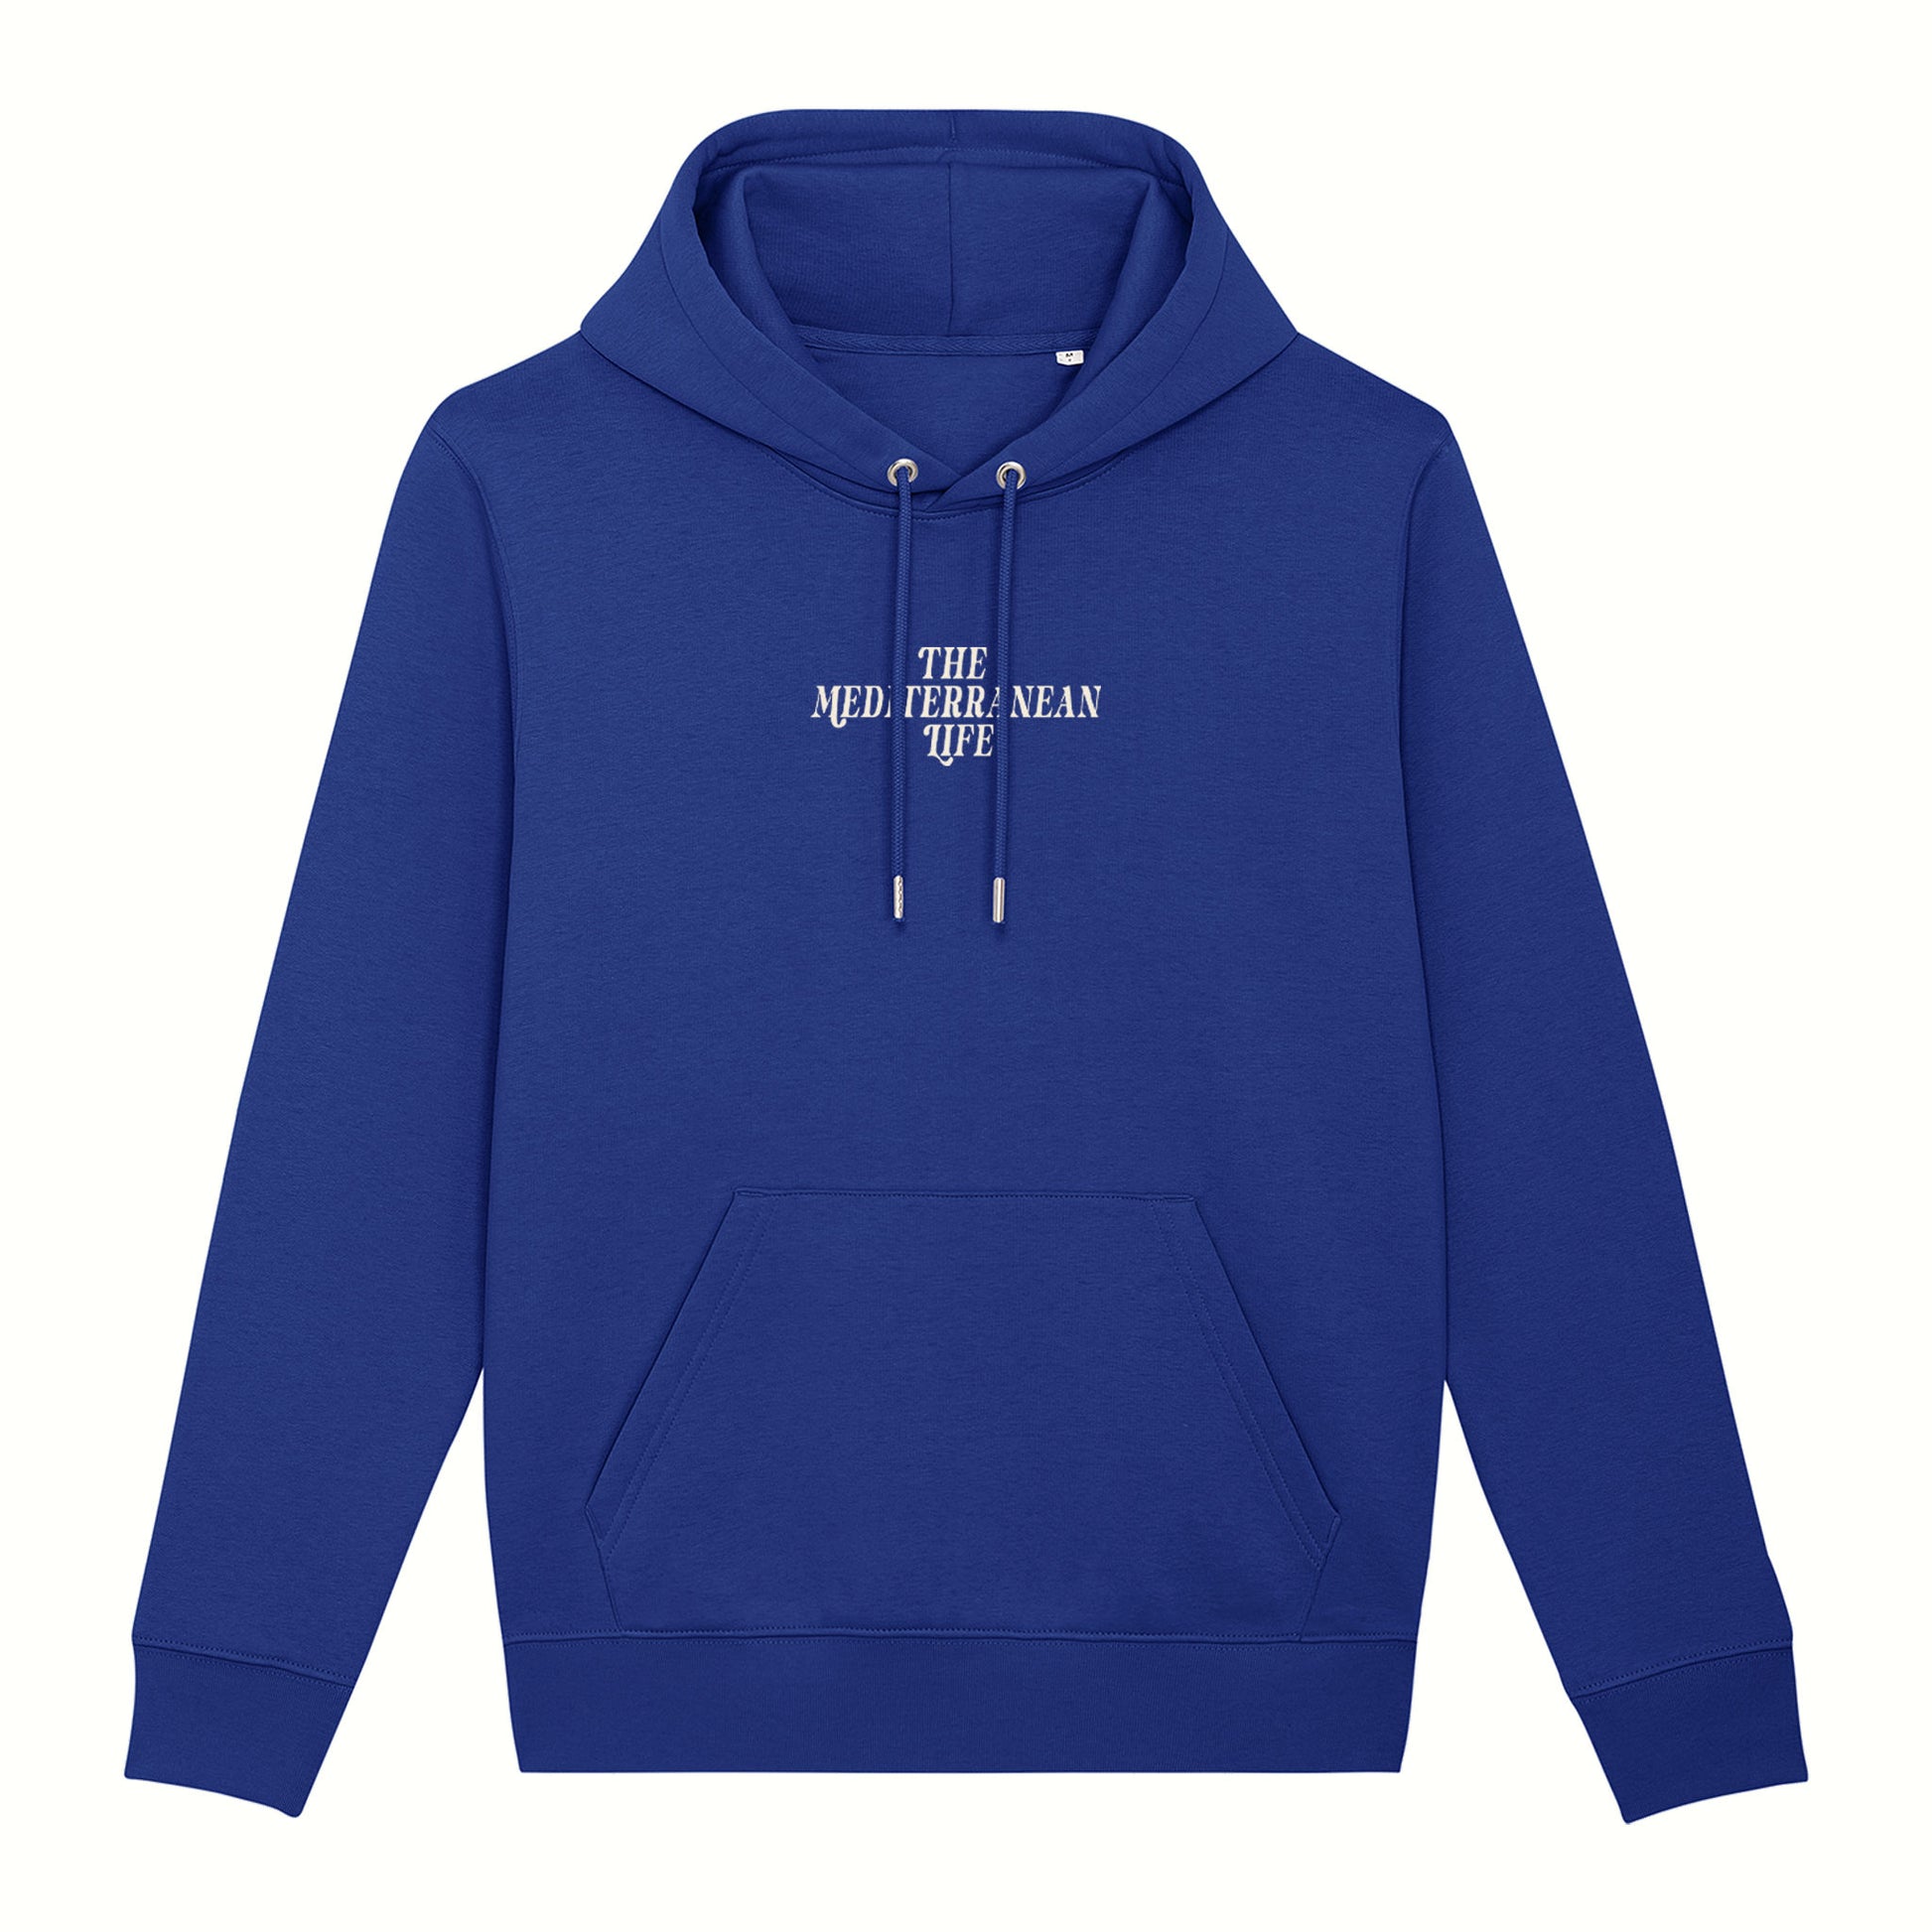 Fear the ordinary sea blue premium organic cotton hoodie with white adventure inspired front print.